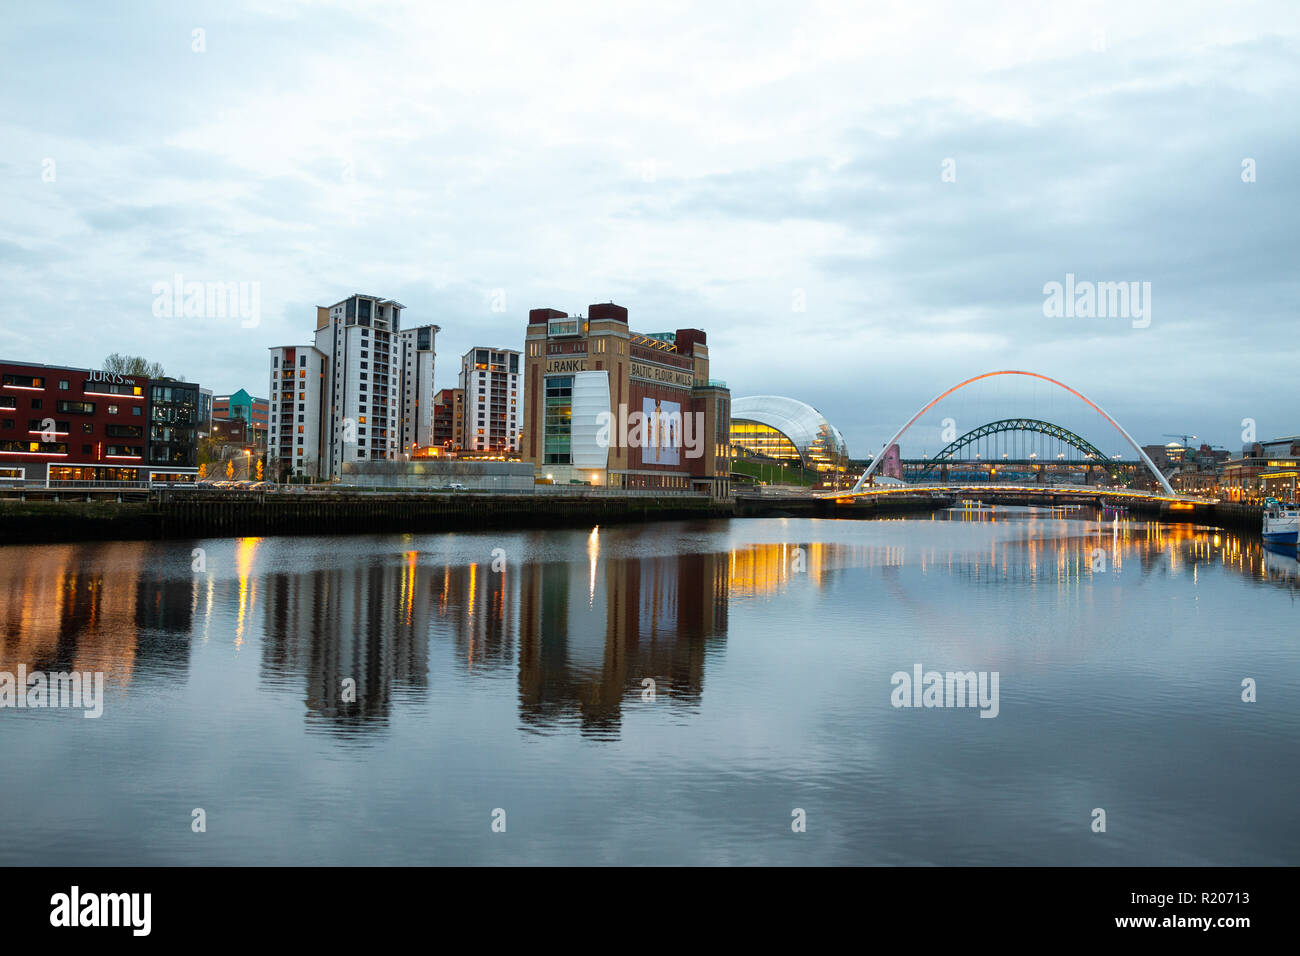 Newcastle upon Tyne/England - April 9th 2014: Newcastle River famous 5 bridges view at dusk Stock Photo